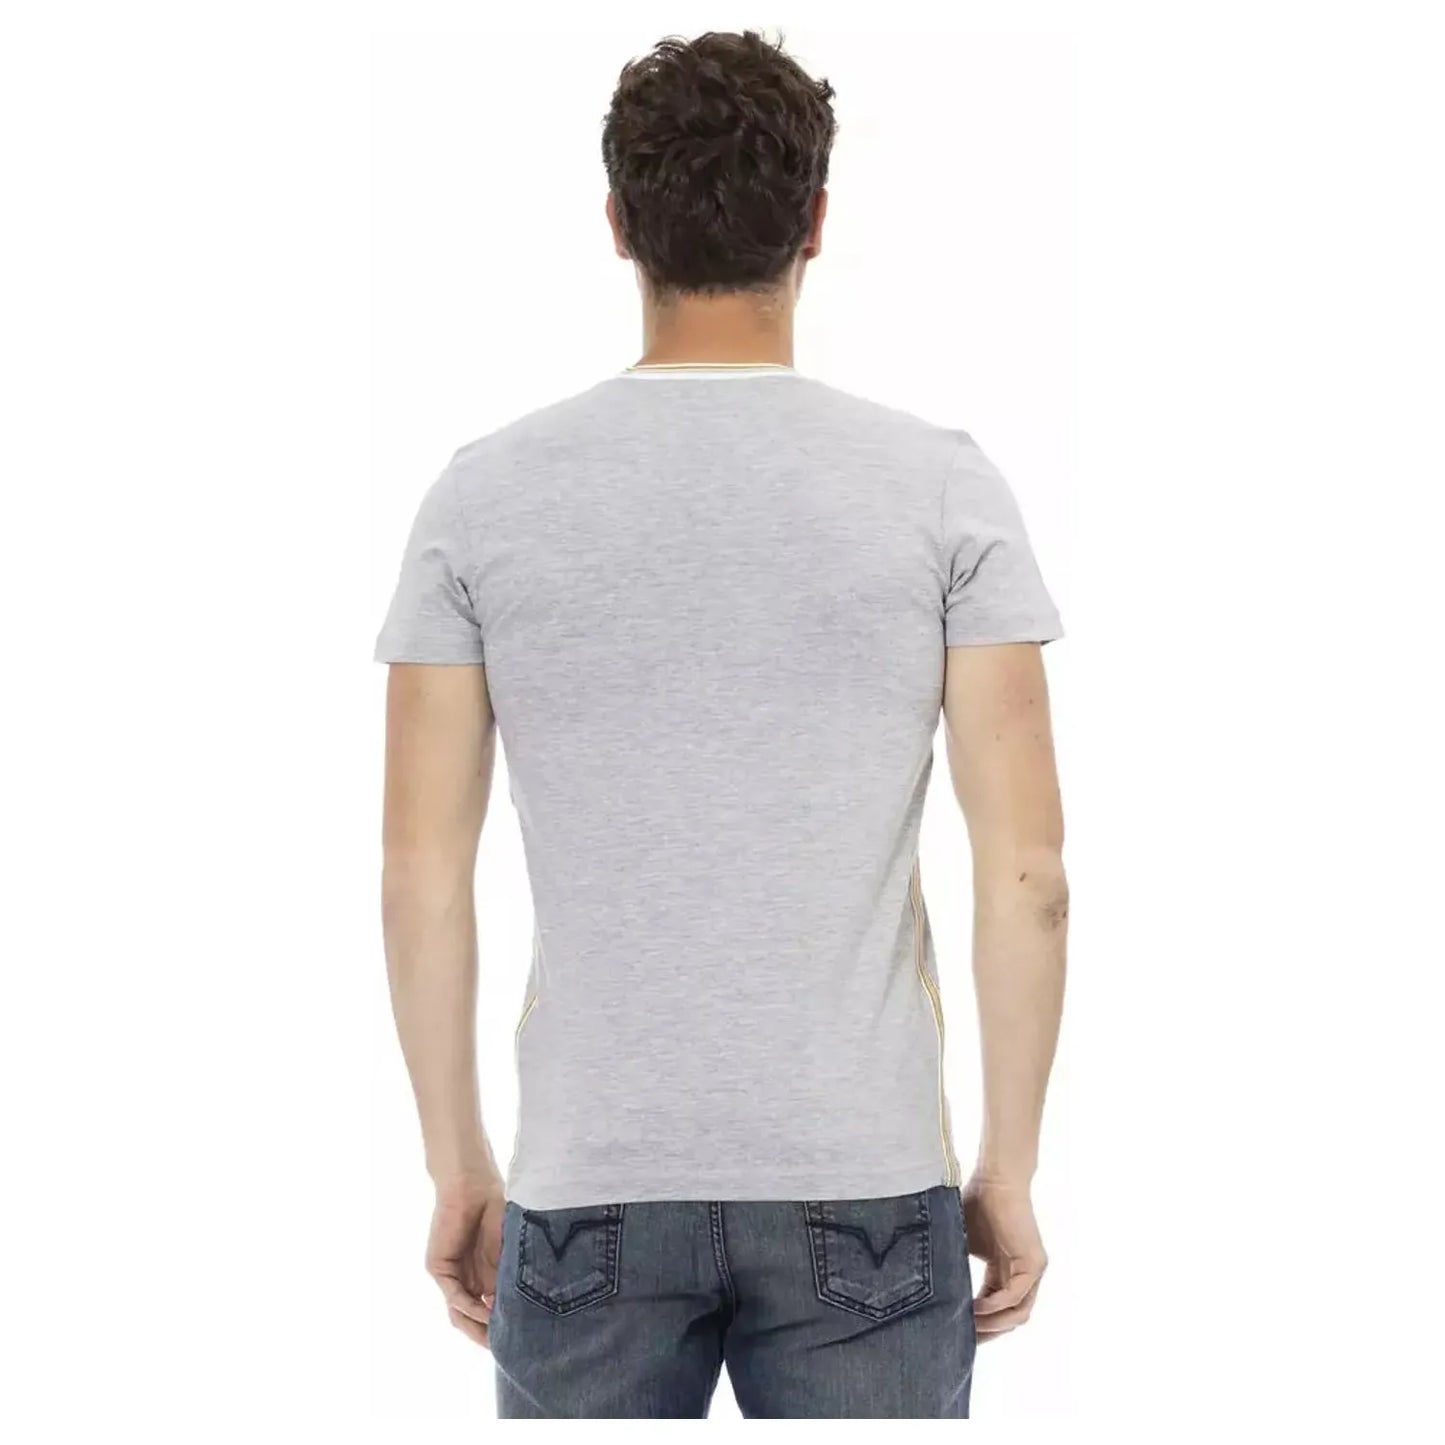 Trussardi Action Elegant V-Neck Tee with Chic Front Print gray-cotton-t-shirt-82